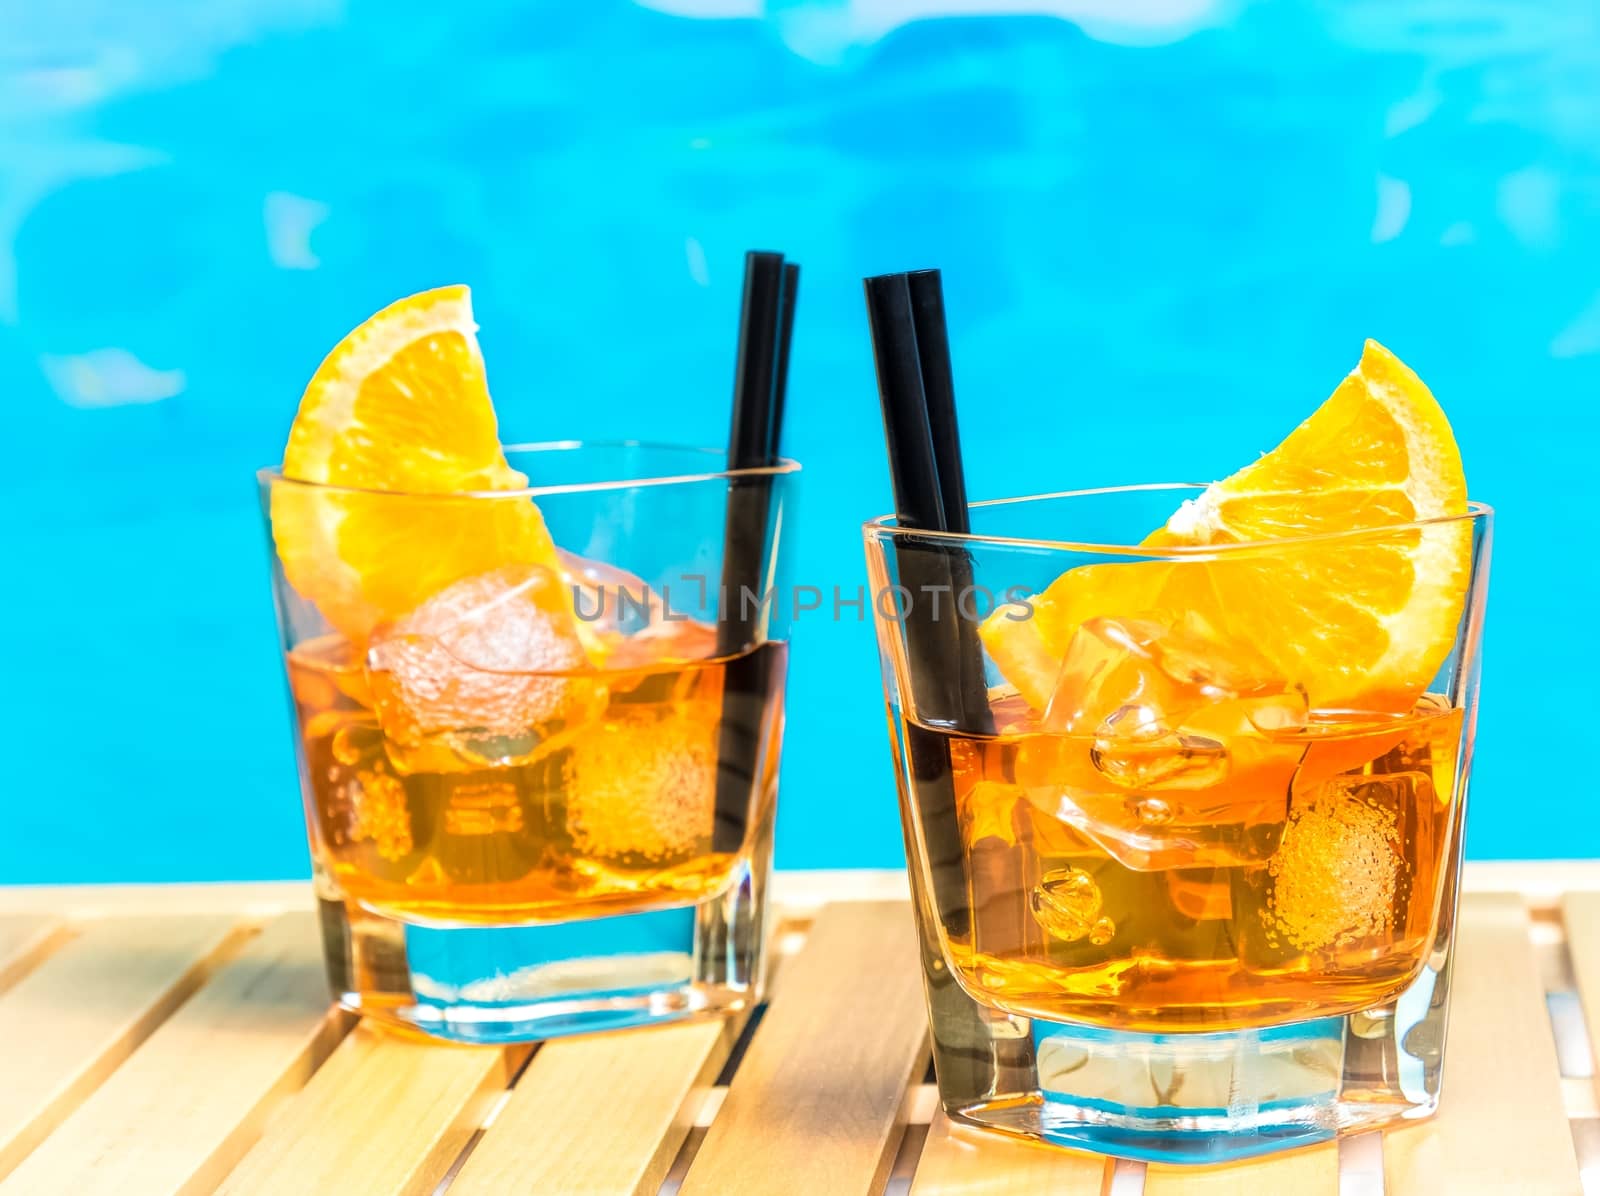 two glasses of spritz aperitif aperol cocktail with orange slices and ice cubes on swimming pool background, summer concept